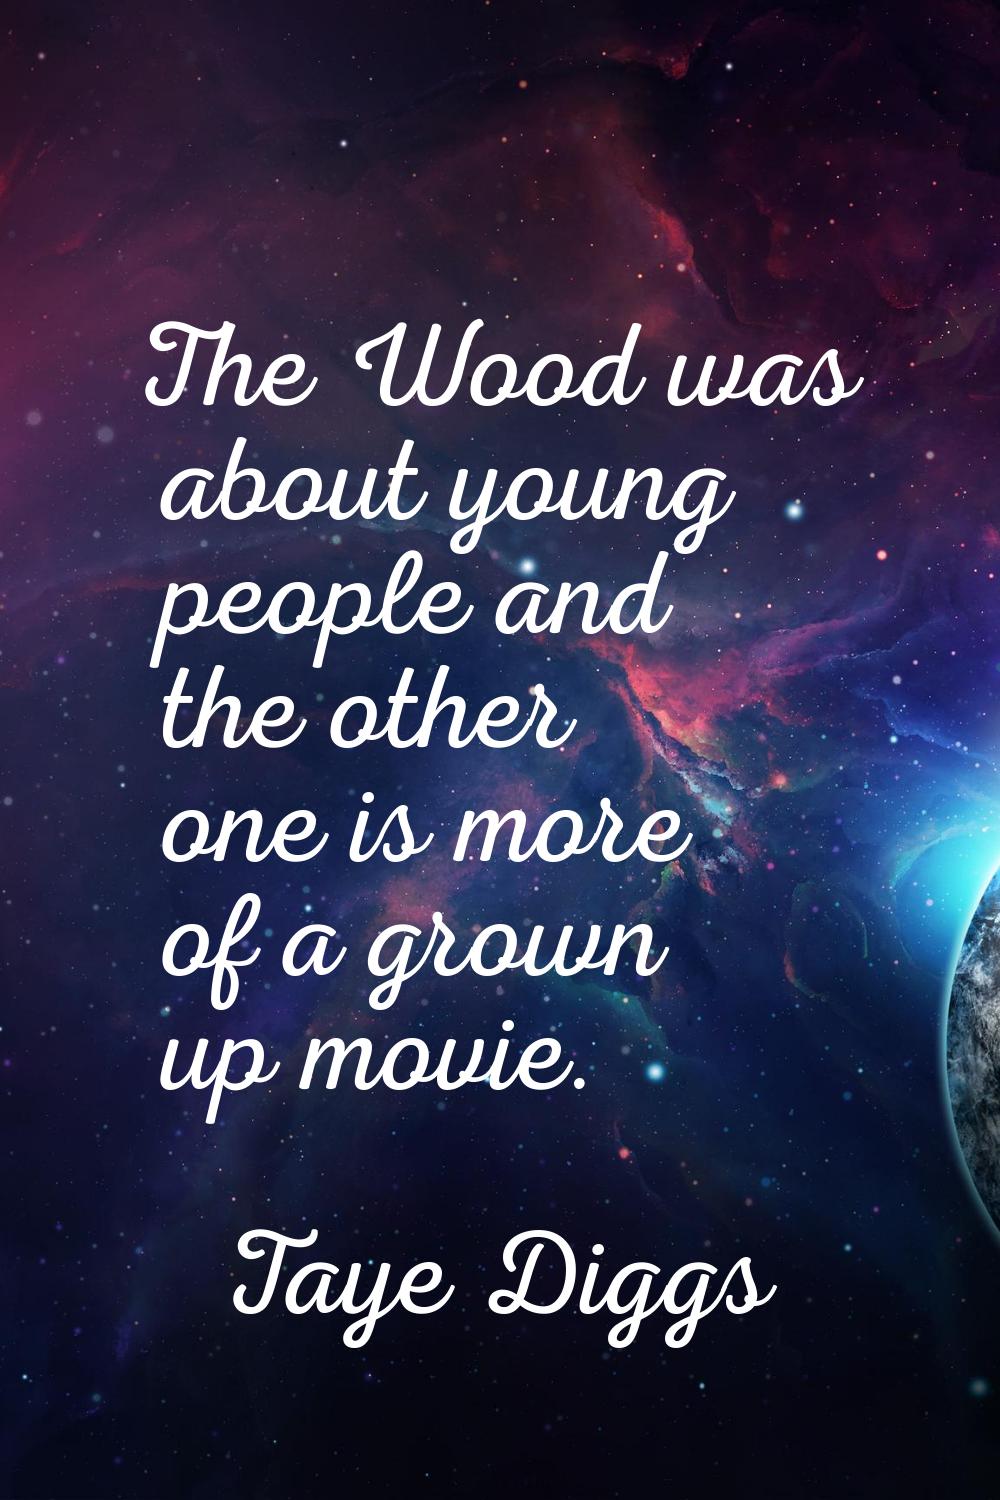 The Wood was about young people and the other one is more of a grown up movie.